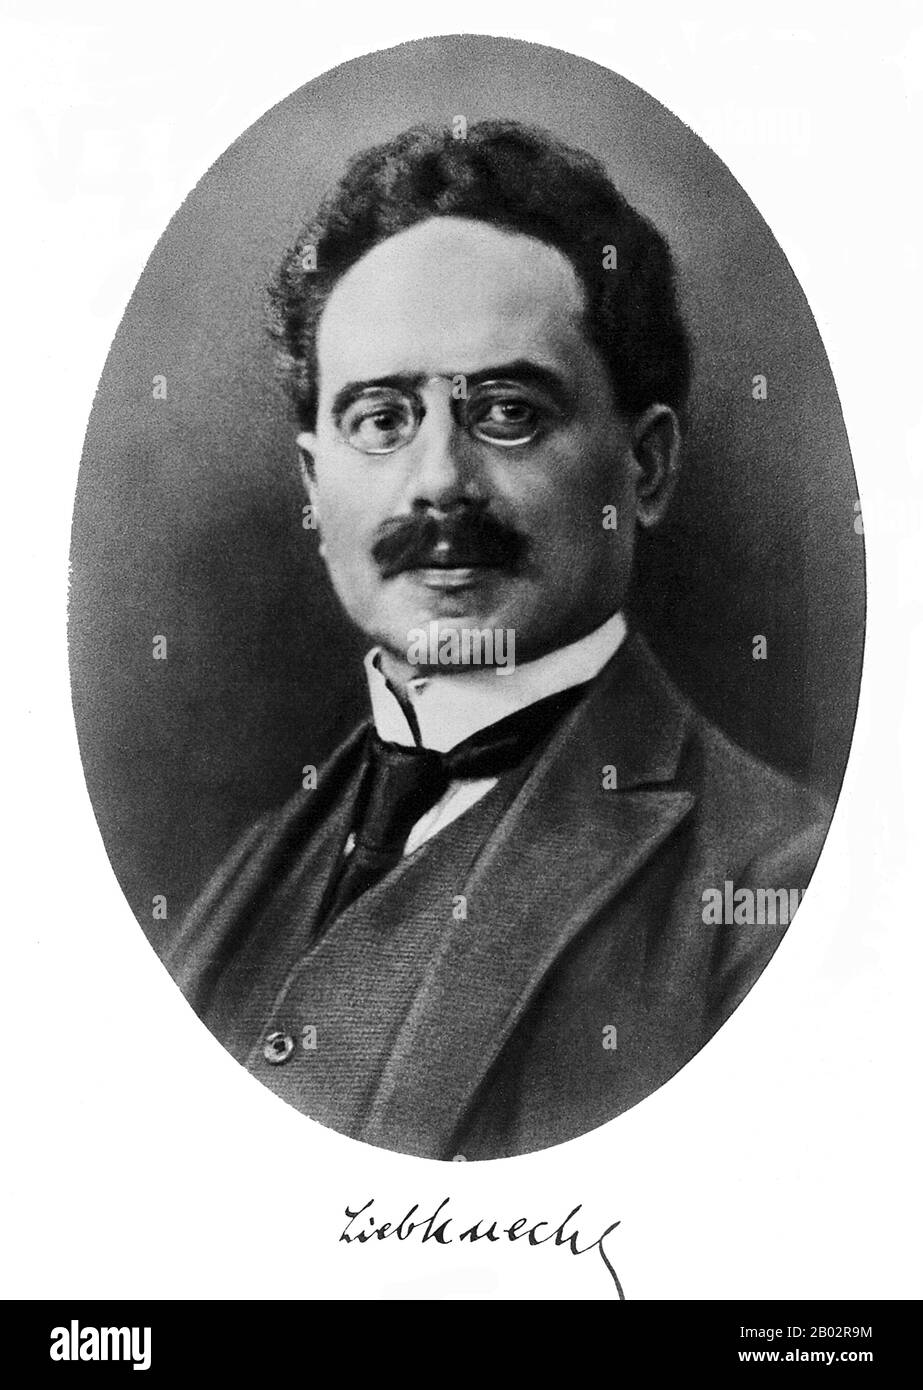 Karl Liebknecht (13 August 1871 – 15 January 1919) was a German socialist and a co-founder with Rosa Luxemburg of the Spartacist League and the Communist Party of Germany. He is best known for his opposition to World War I in the Reichstag and his role in the Spartacist uprising of 1919.  The uprising was crushed by the social democrat government and the Freikorps (paramilitary units formed of World War I veterans). Liebknecht and Luxemburg were killed.  After their deaths, Karl Liebknecht and Rosa Luxemburg became martyrs for German left wing politics. Stock Photo